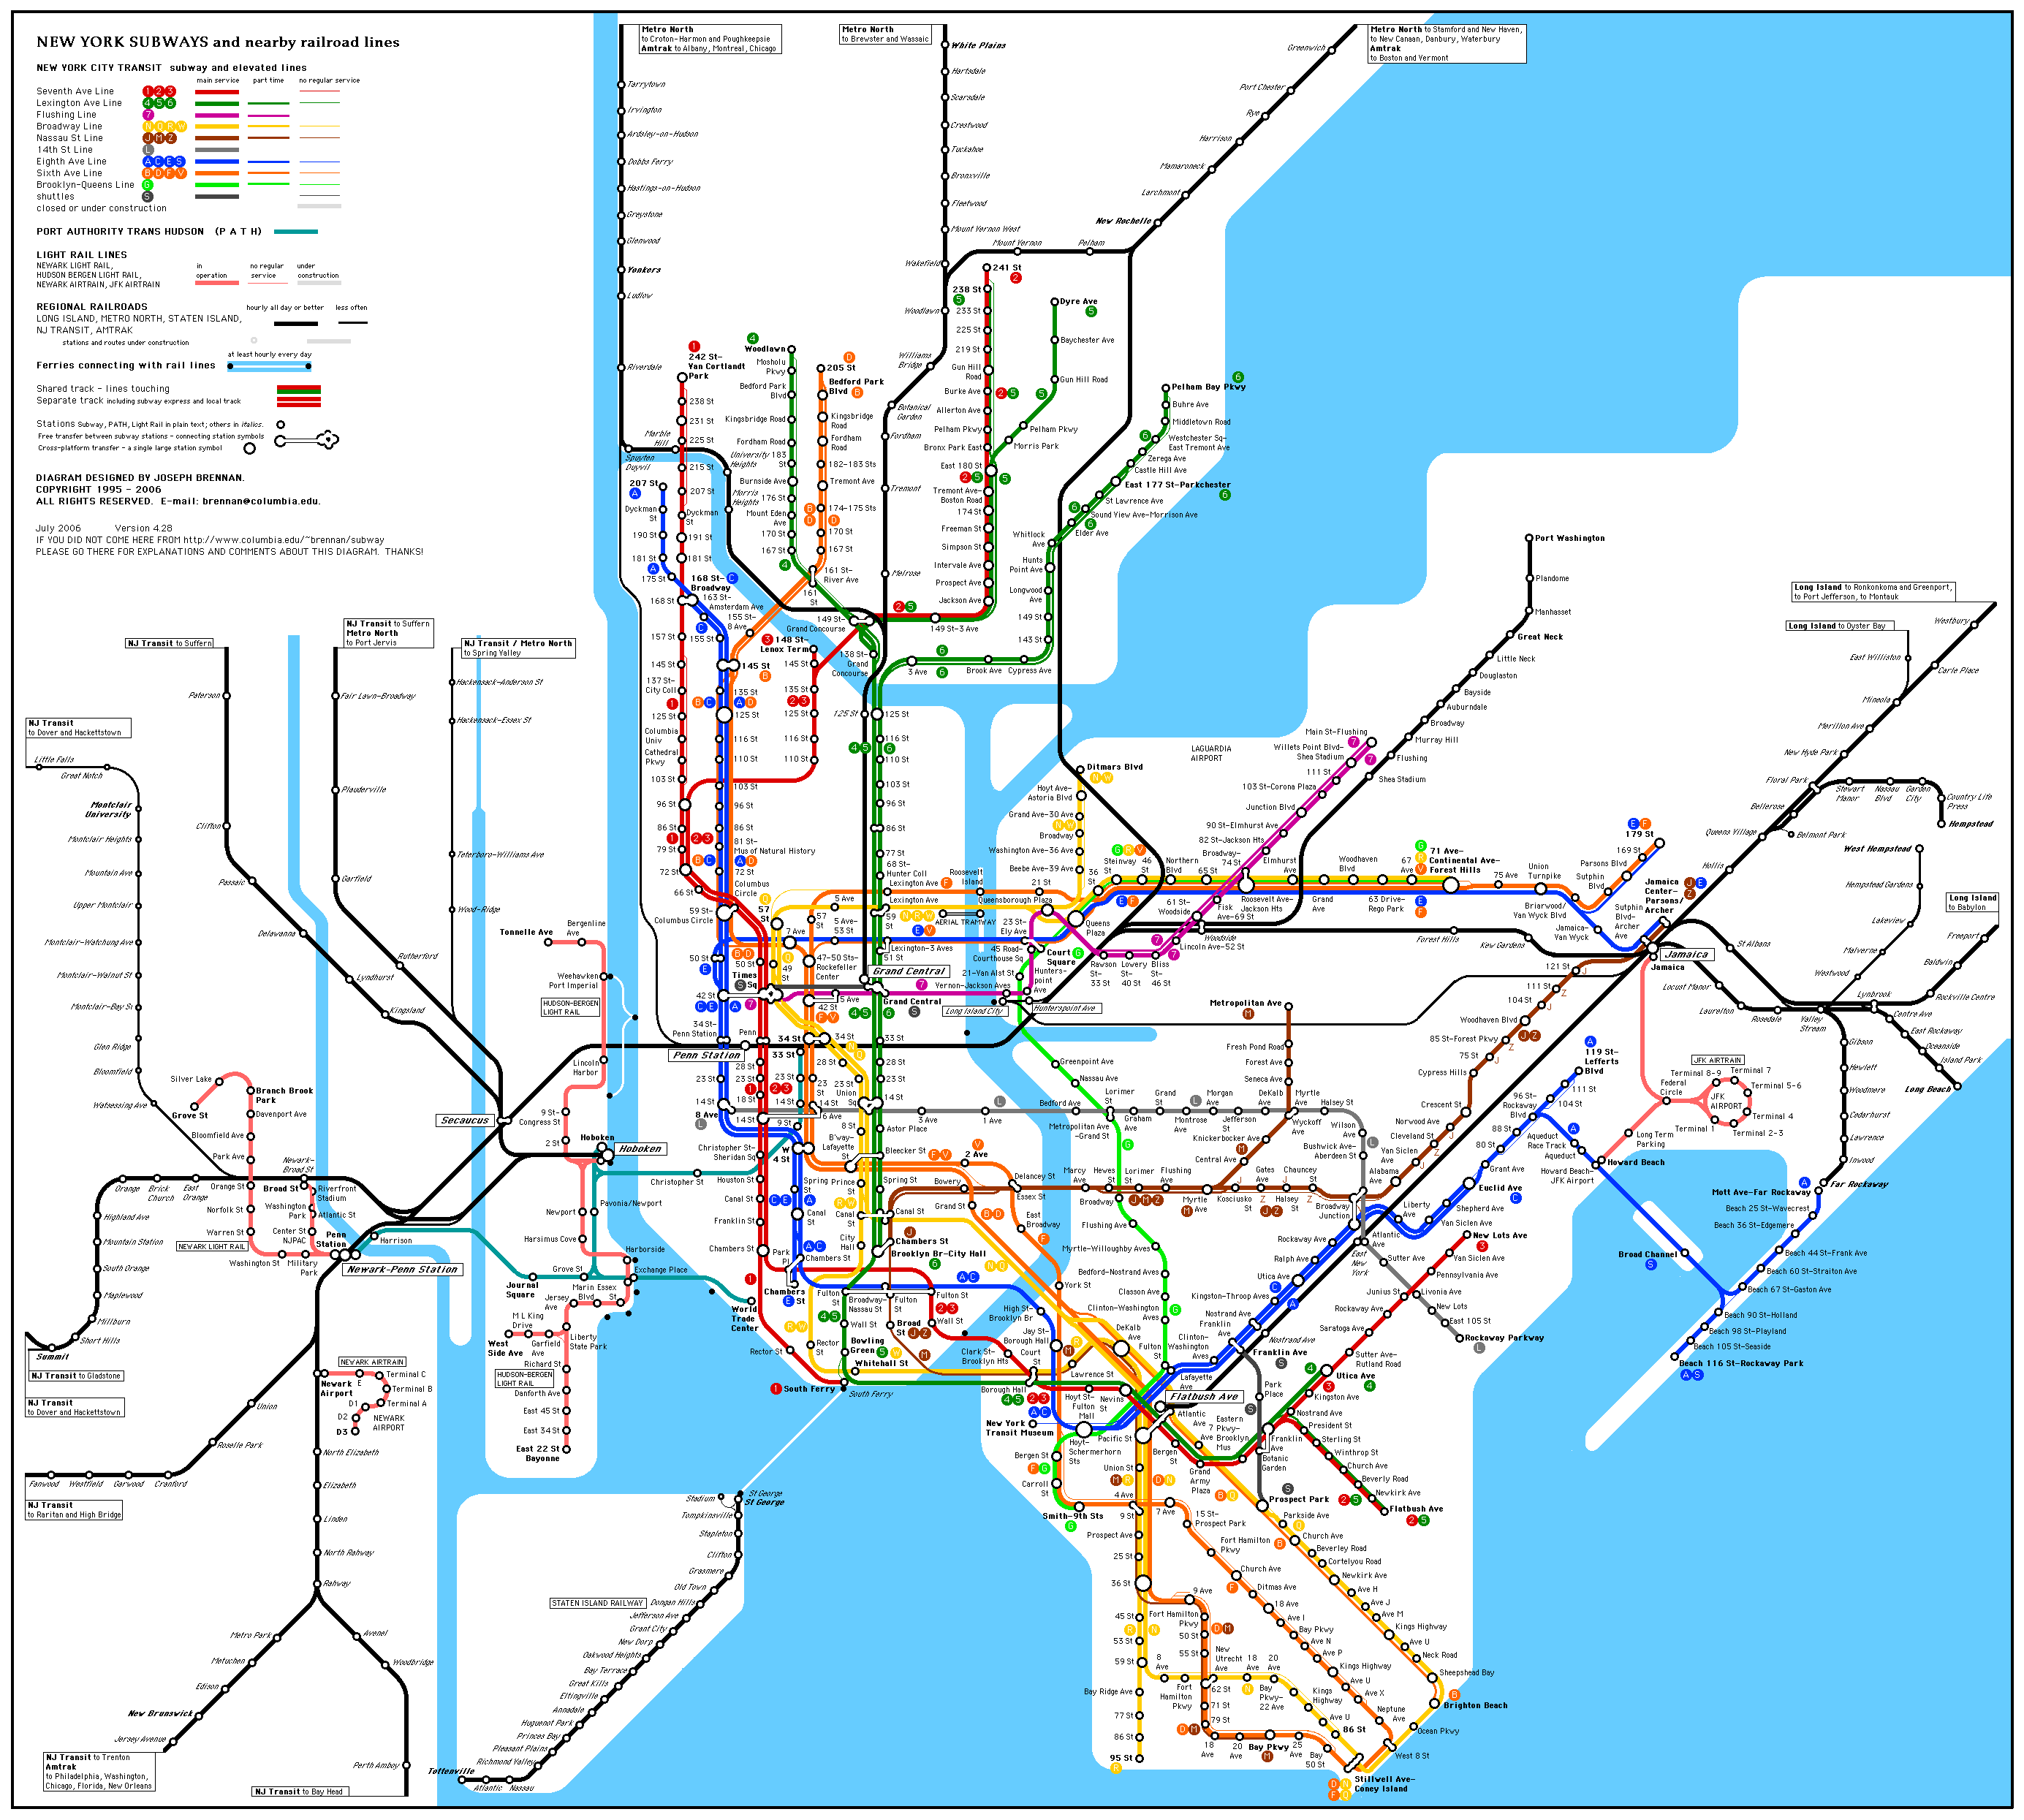 How do you view a NY Subway map on a smartphone?